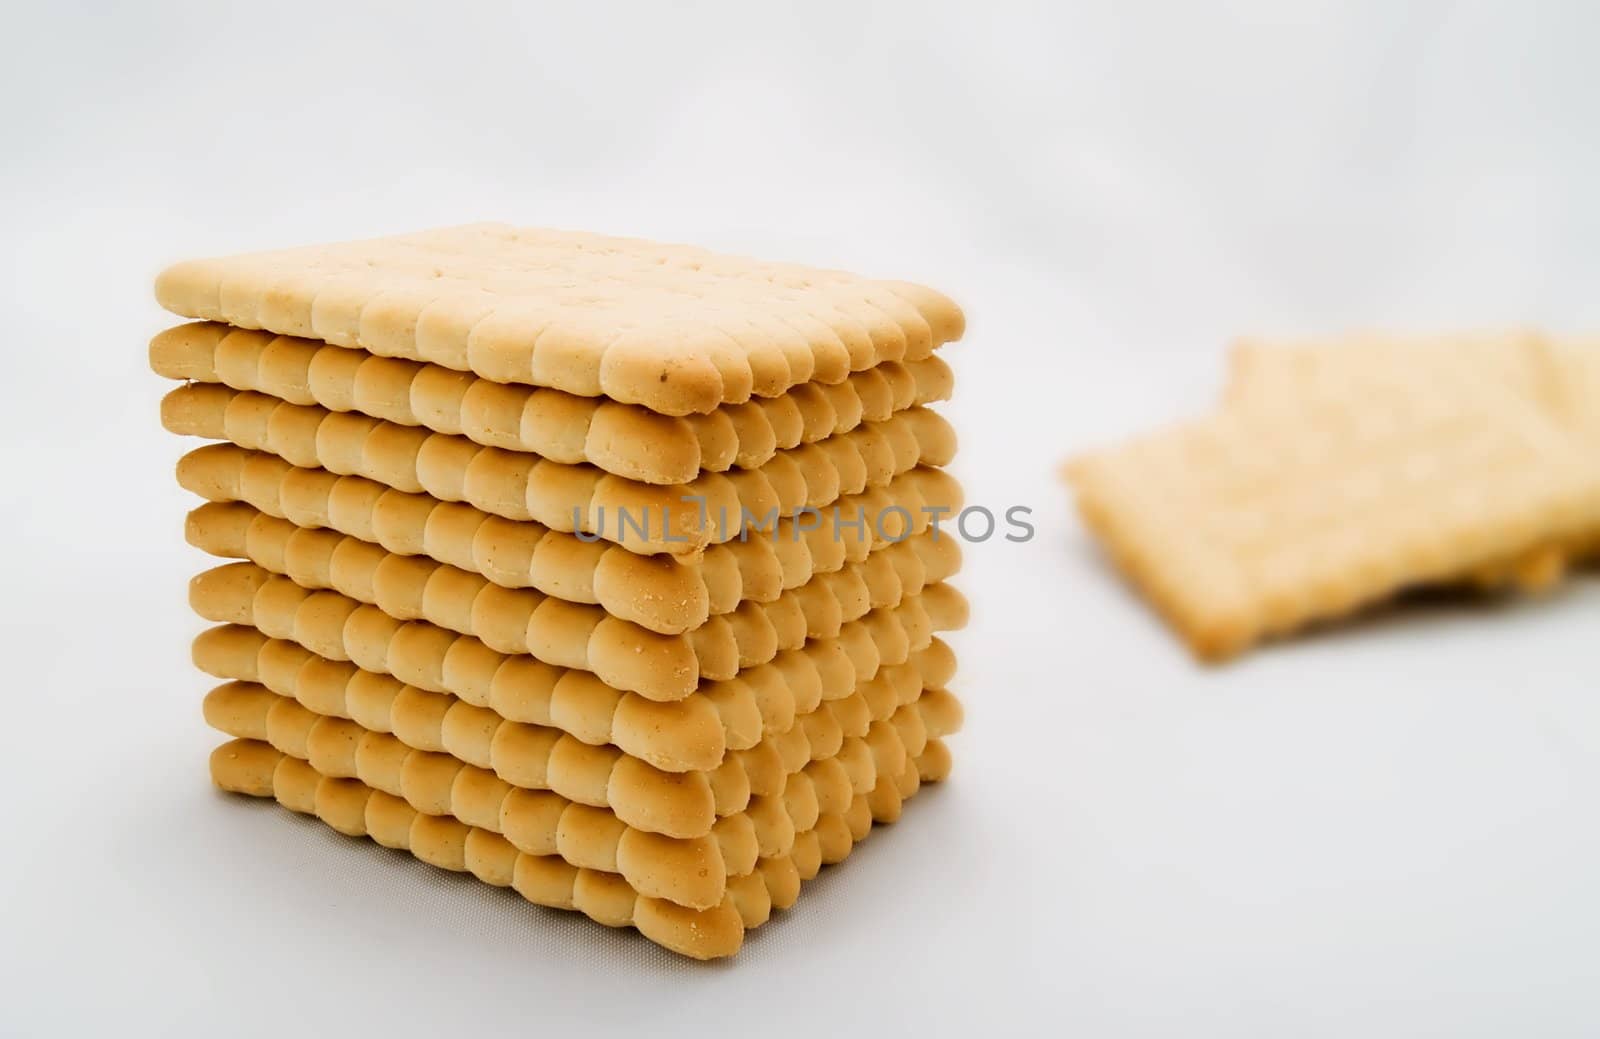 Biscuits on a white background